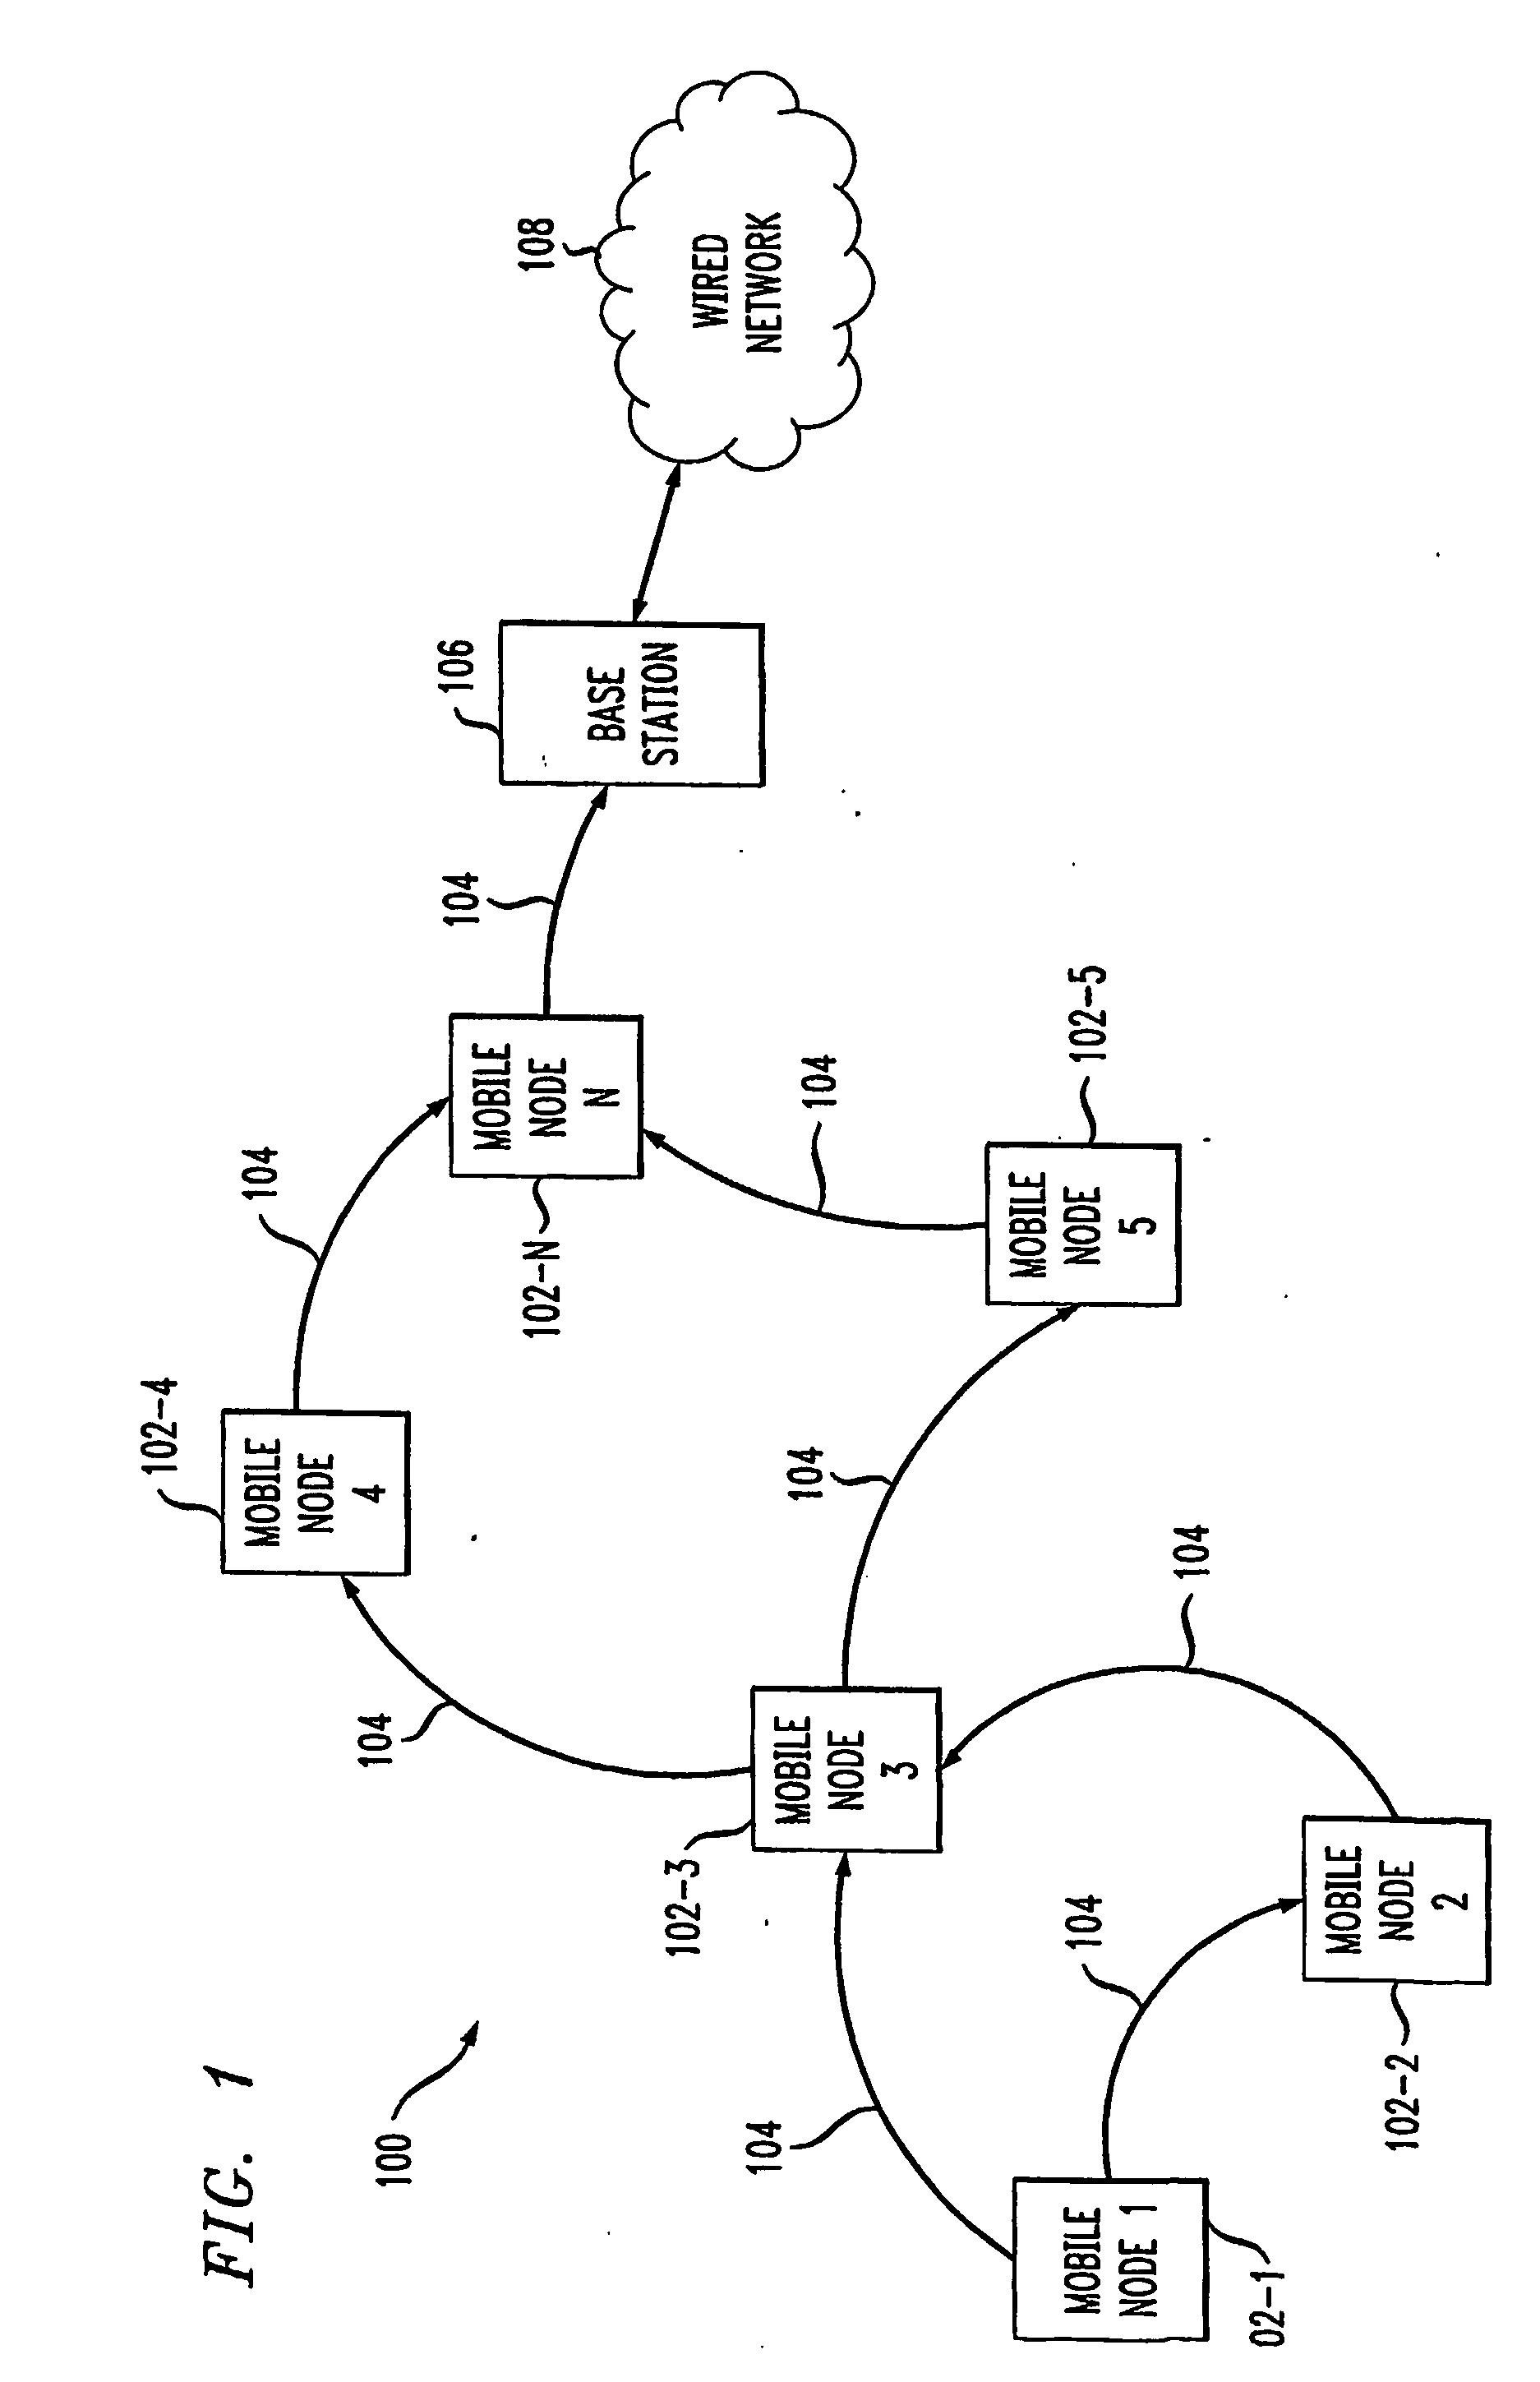 Maximum lifetime routing in wireless ad-hoc networks